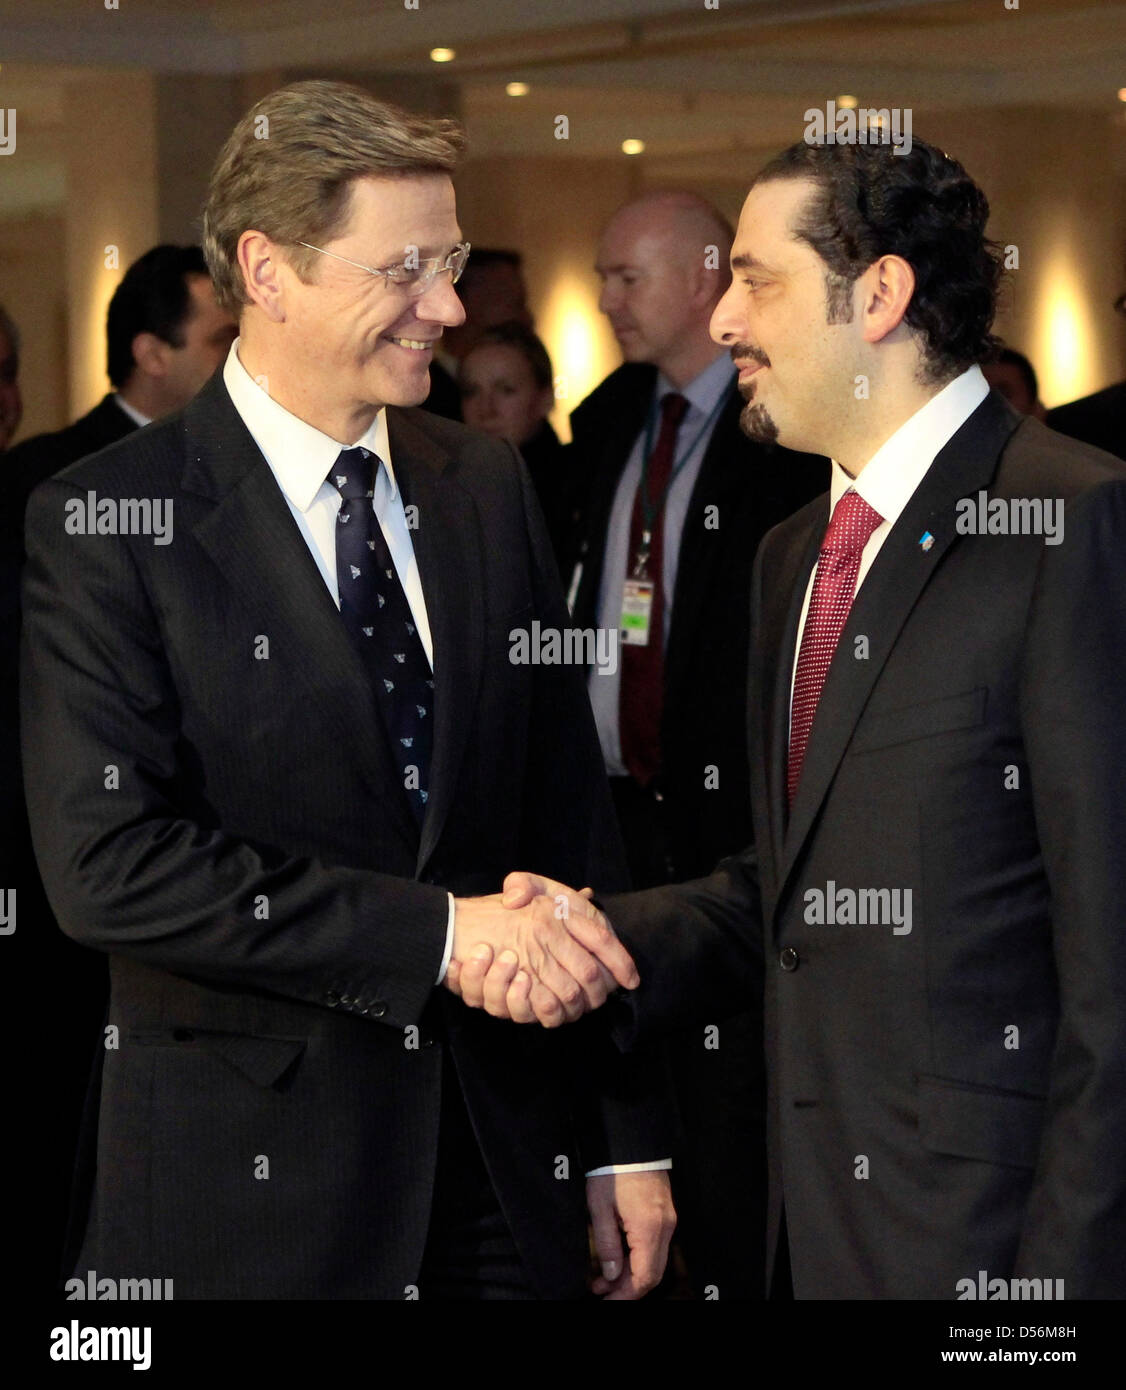 Lebanon's Prime Minister Saad al-Hariri (R) welcomes German Foreign Minister Guido Westerwelle for bilateral talks at Berlin's Adlon hotel, Germany, 15 March 2010. Photo: FABRIZIO BENSCH/REUTERS POOL Stock Photo